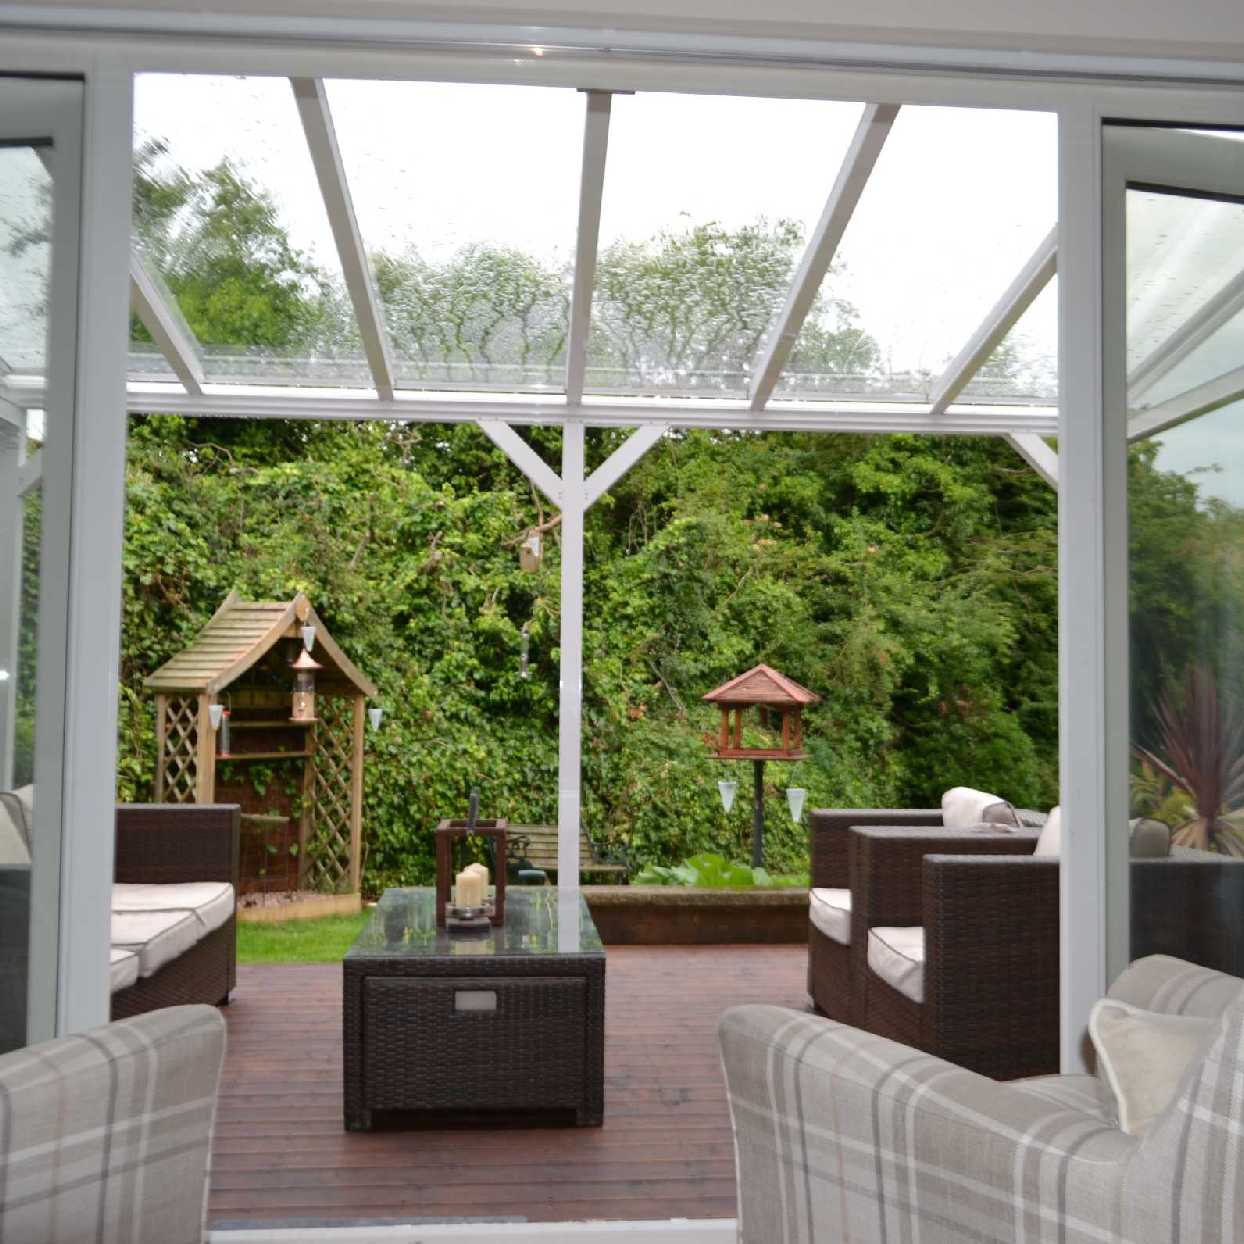 Great selection of Omega Smart Lean-To Canopy, White UNGLAZED for 6mm Glazing - 4.2m (W) x 1.5m (P), (3) Supporting Posts